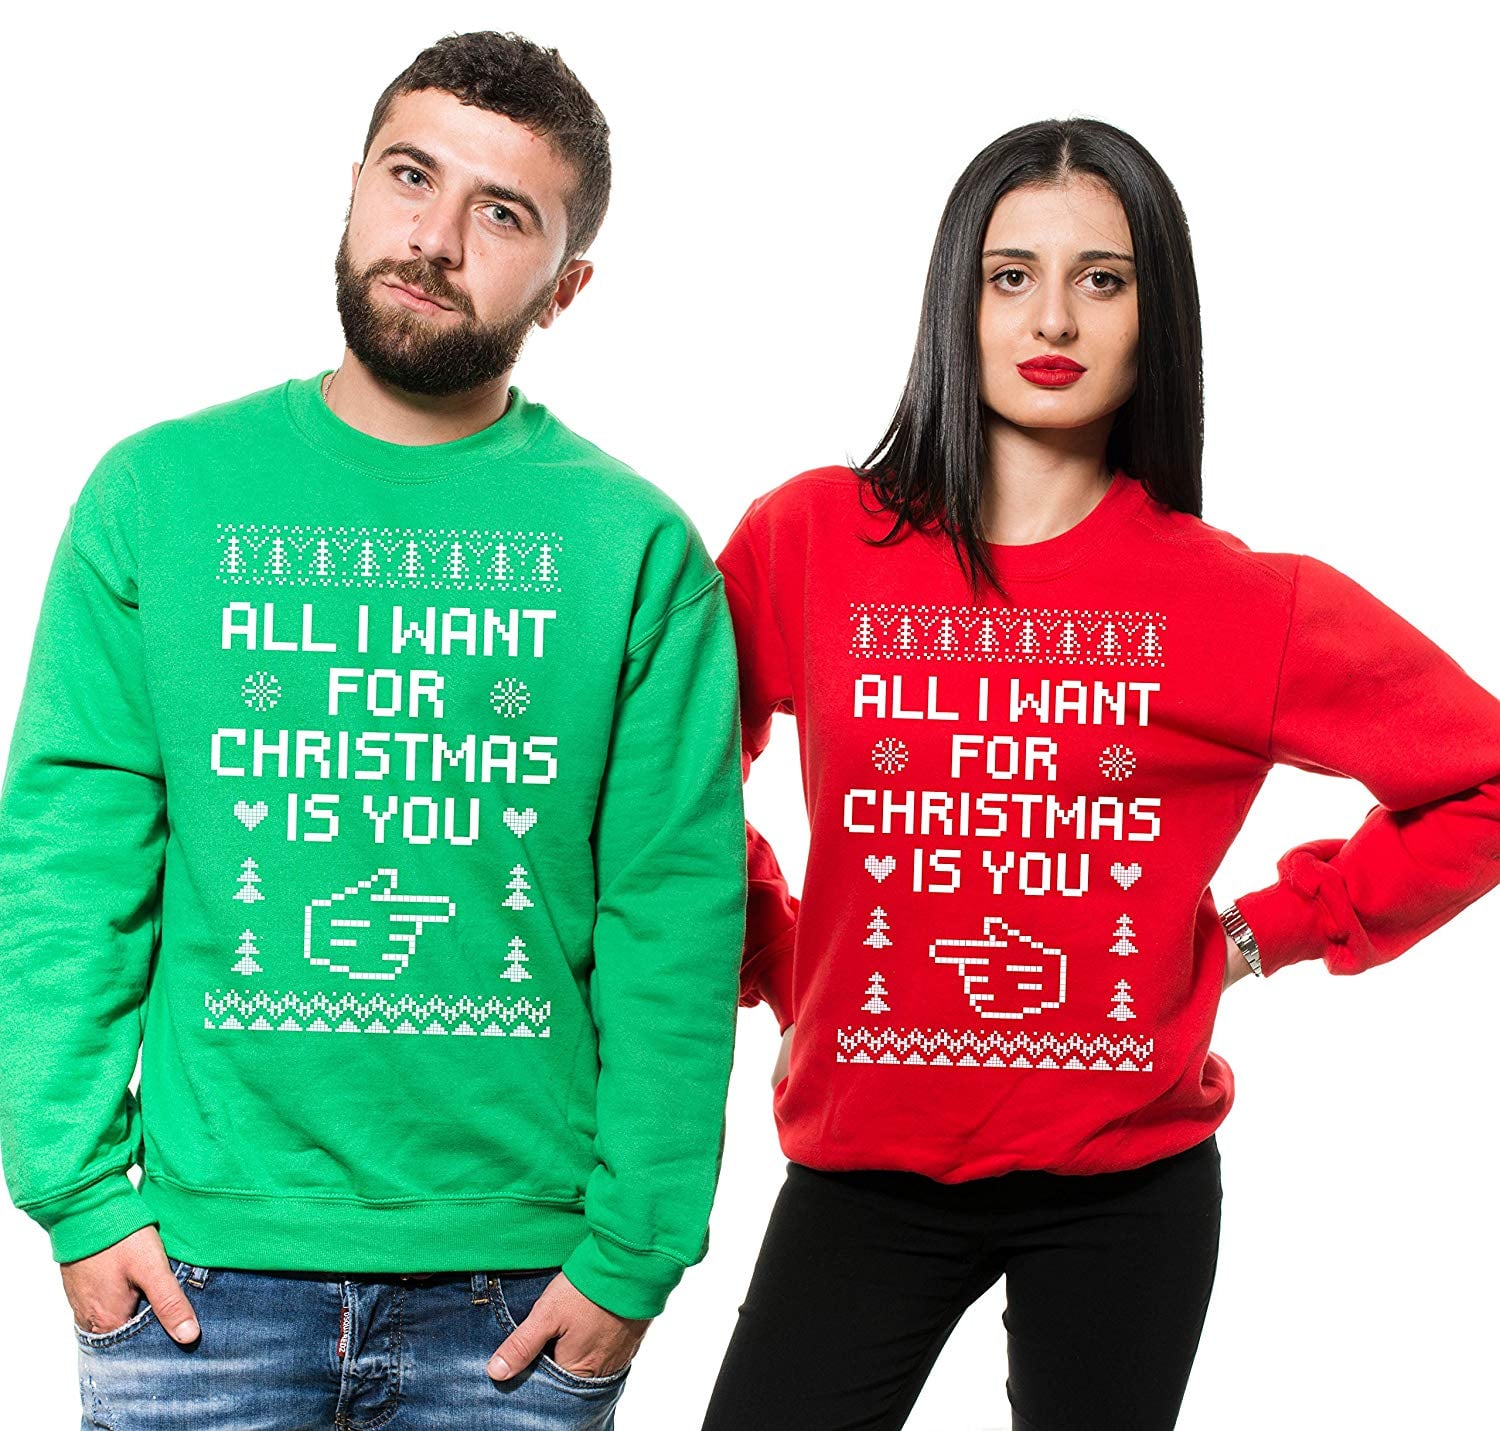 20 Prettiest Christmas Sweaters 2022 - Cute and Stylish Holiday Sweaters